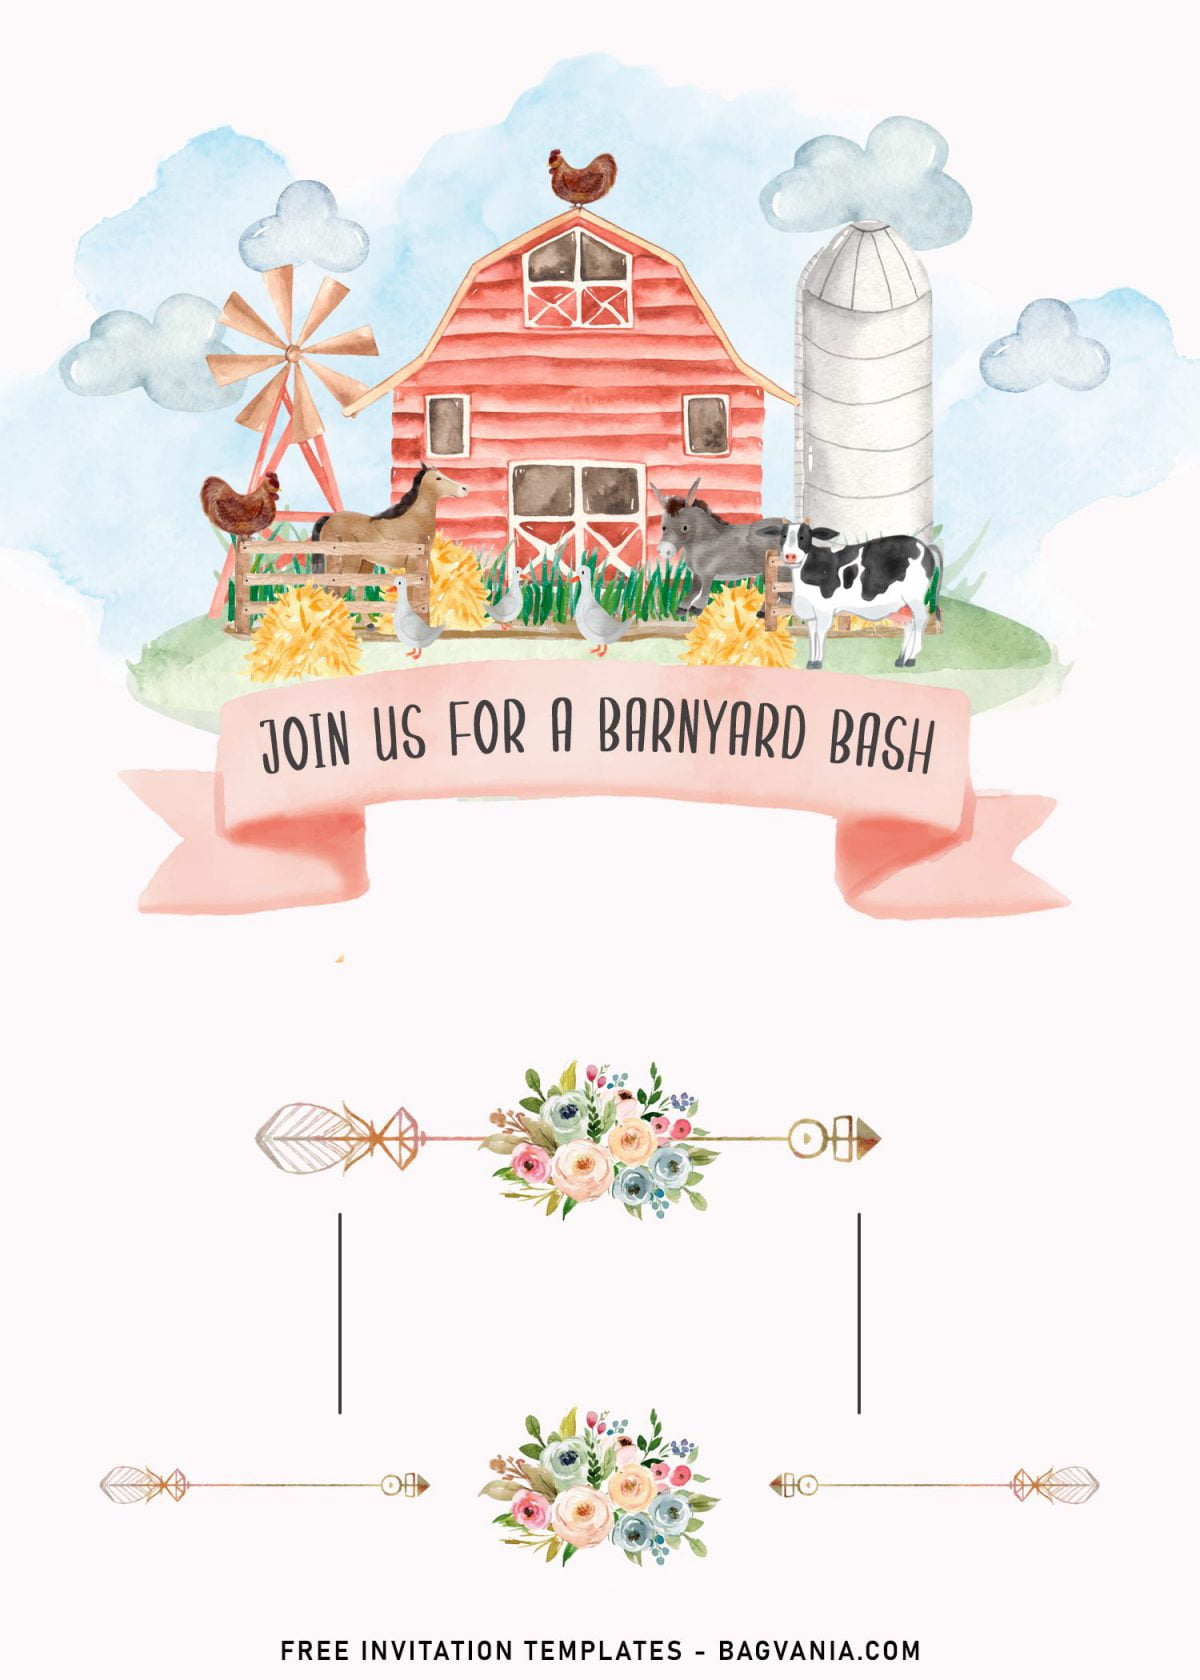 11+ Whimsical Farm Birthday Party Invitation Templates and has watercolor painting of chicken